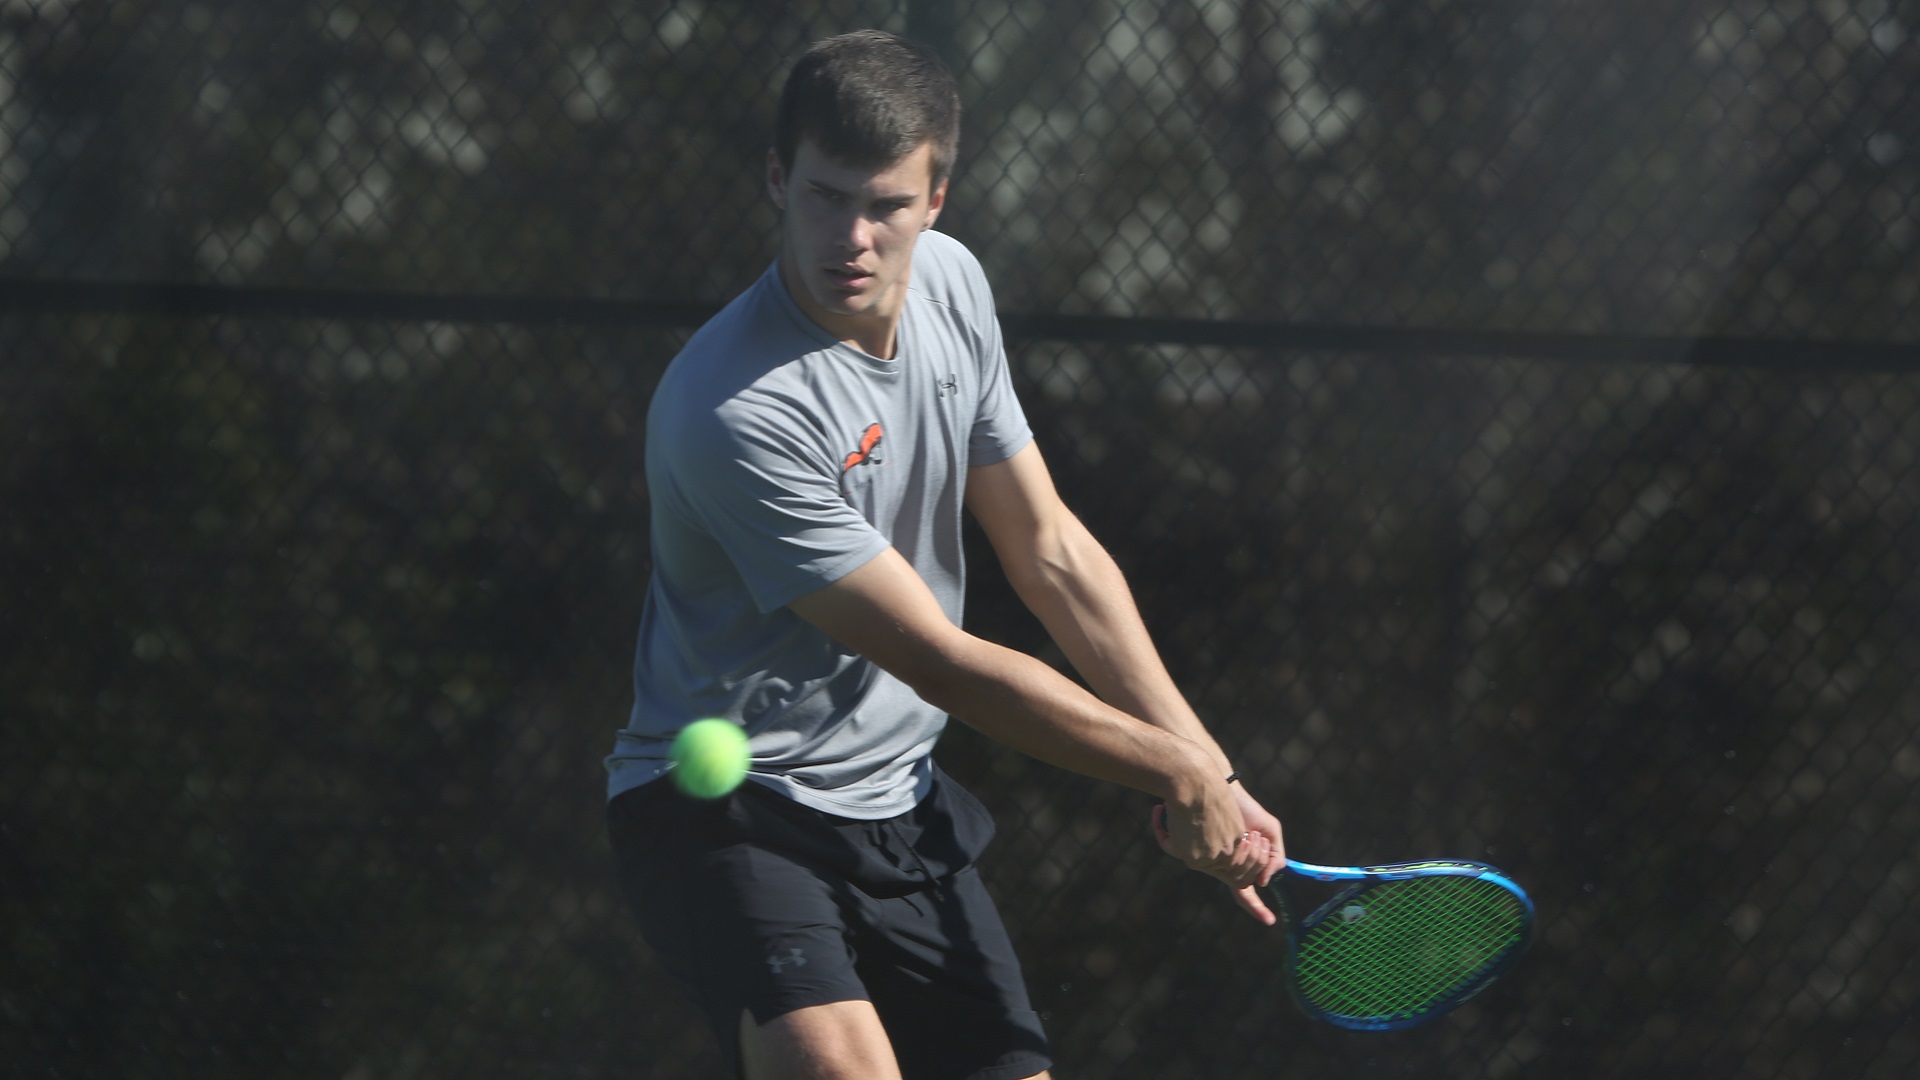 Nemanja Subanovic won in both singles and doubles for the Pioneers against Mars Hill